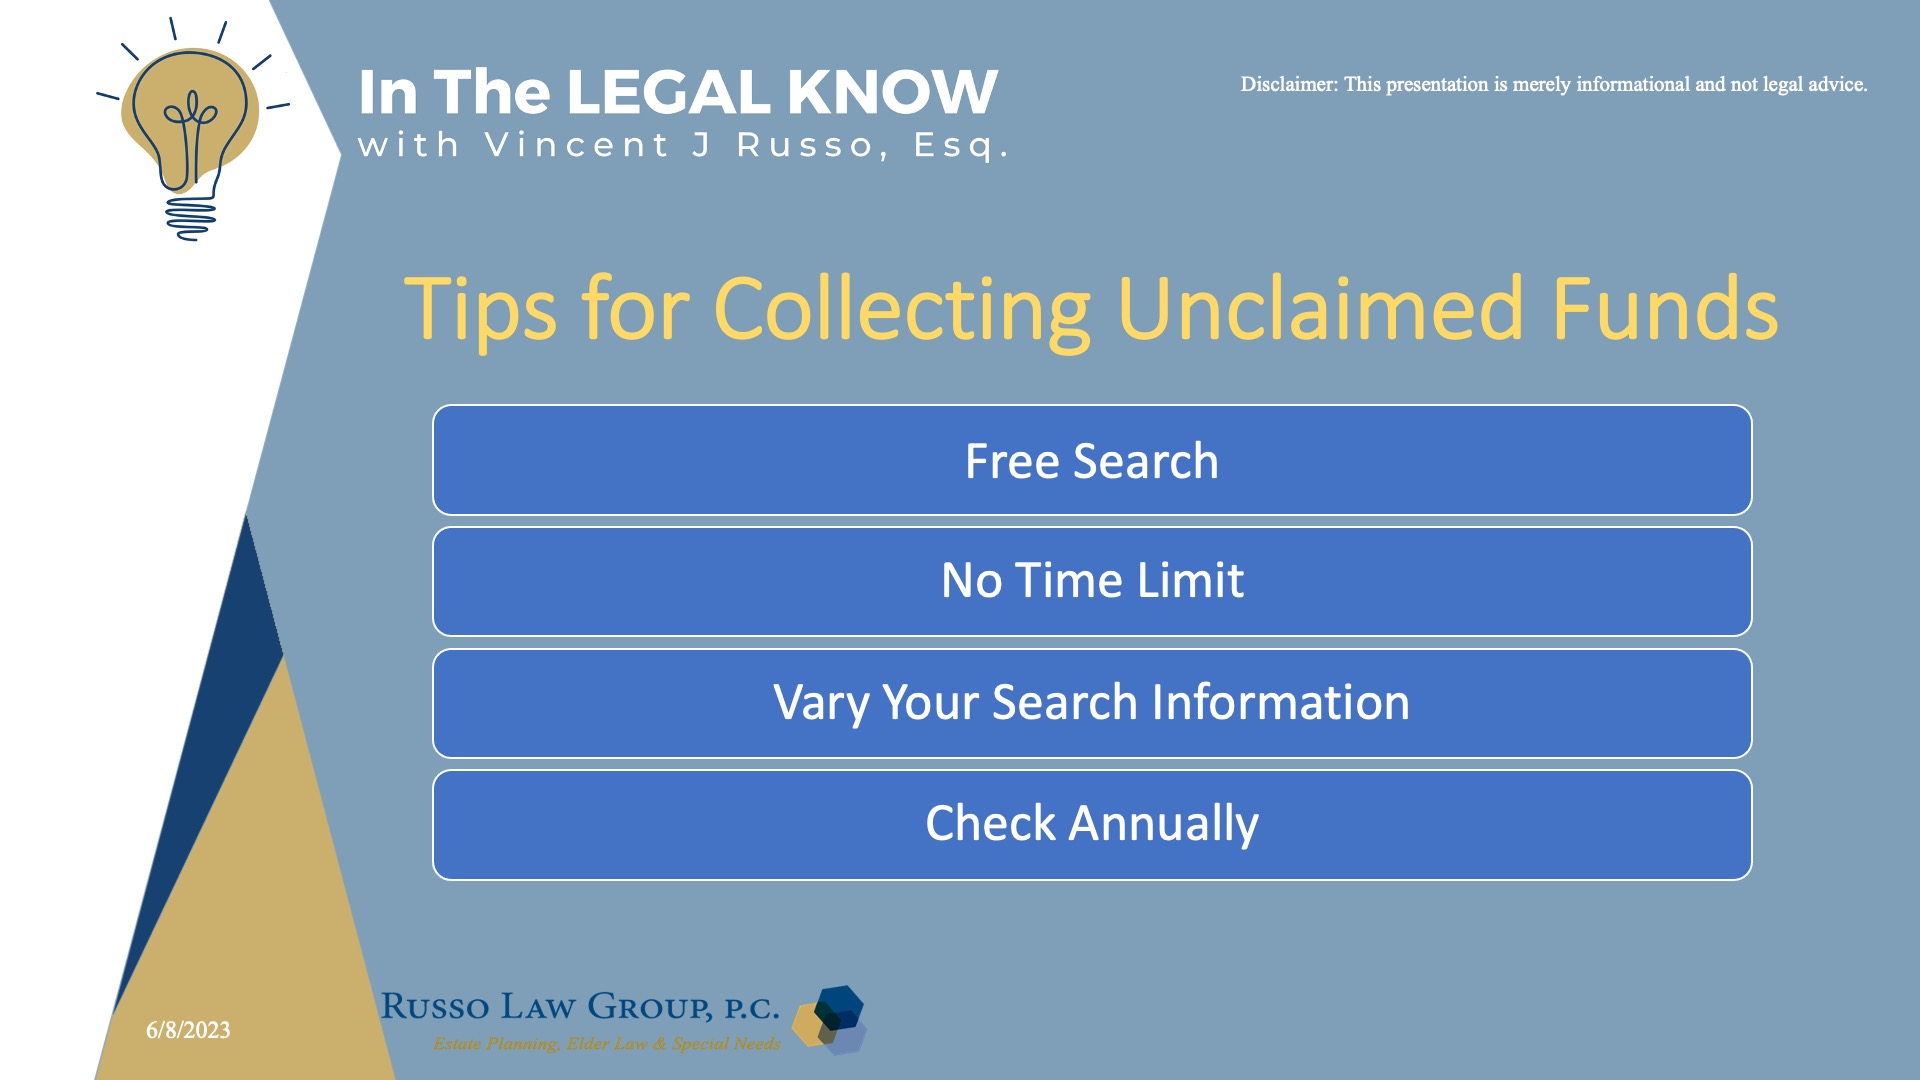 Tips for Collecting Unclaimed Funds